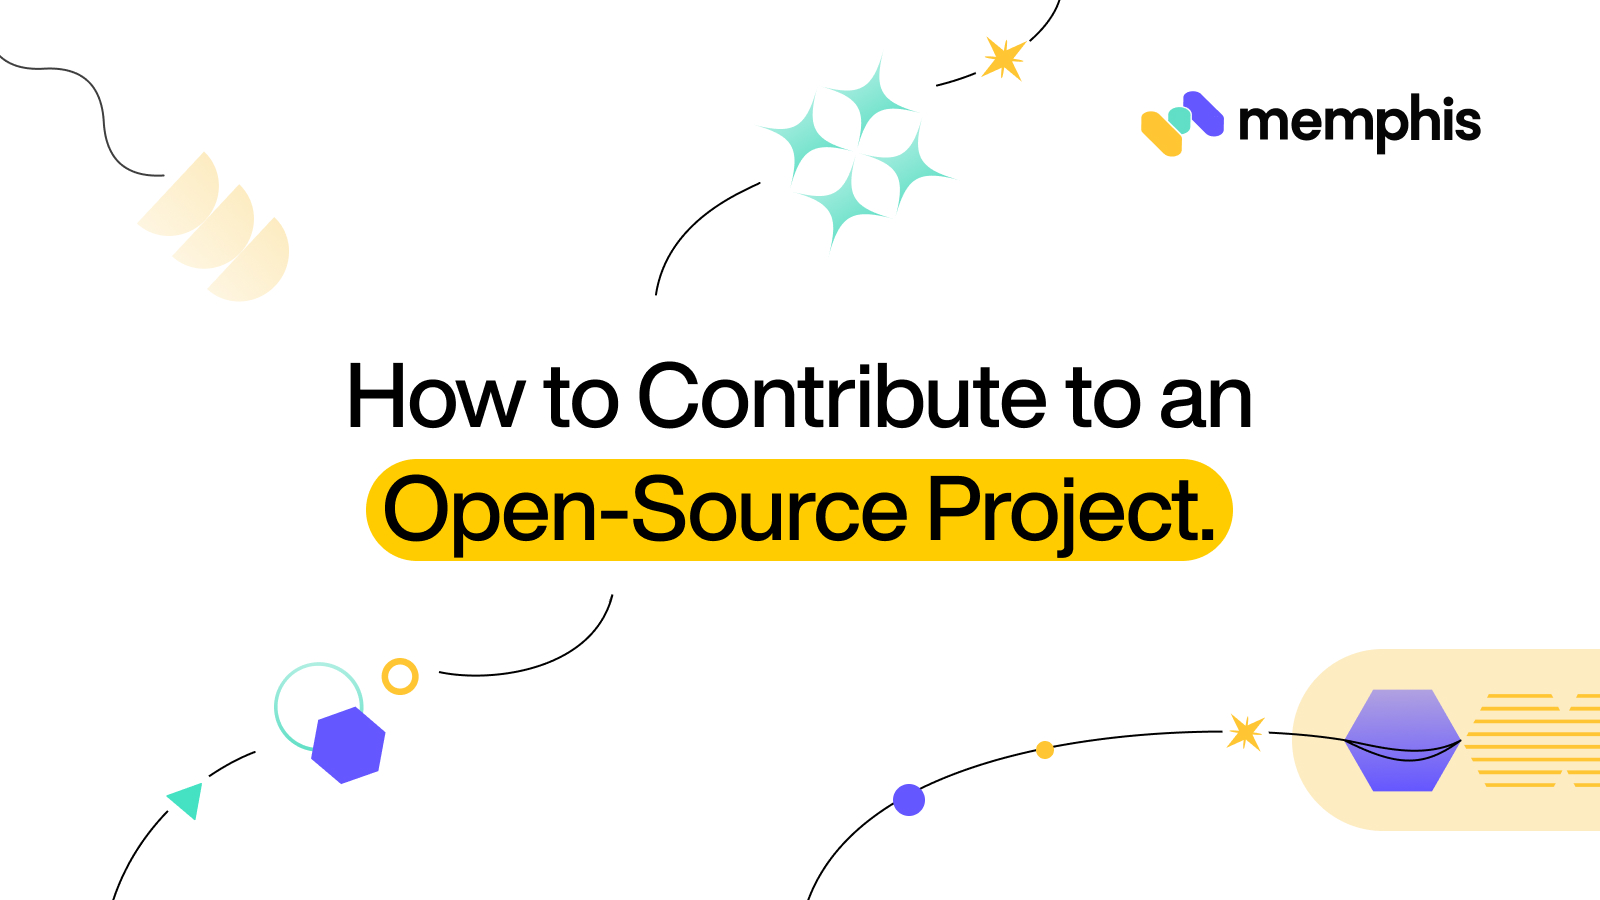 How to Contribute to an Open-Source Project